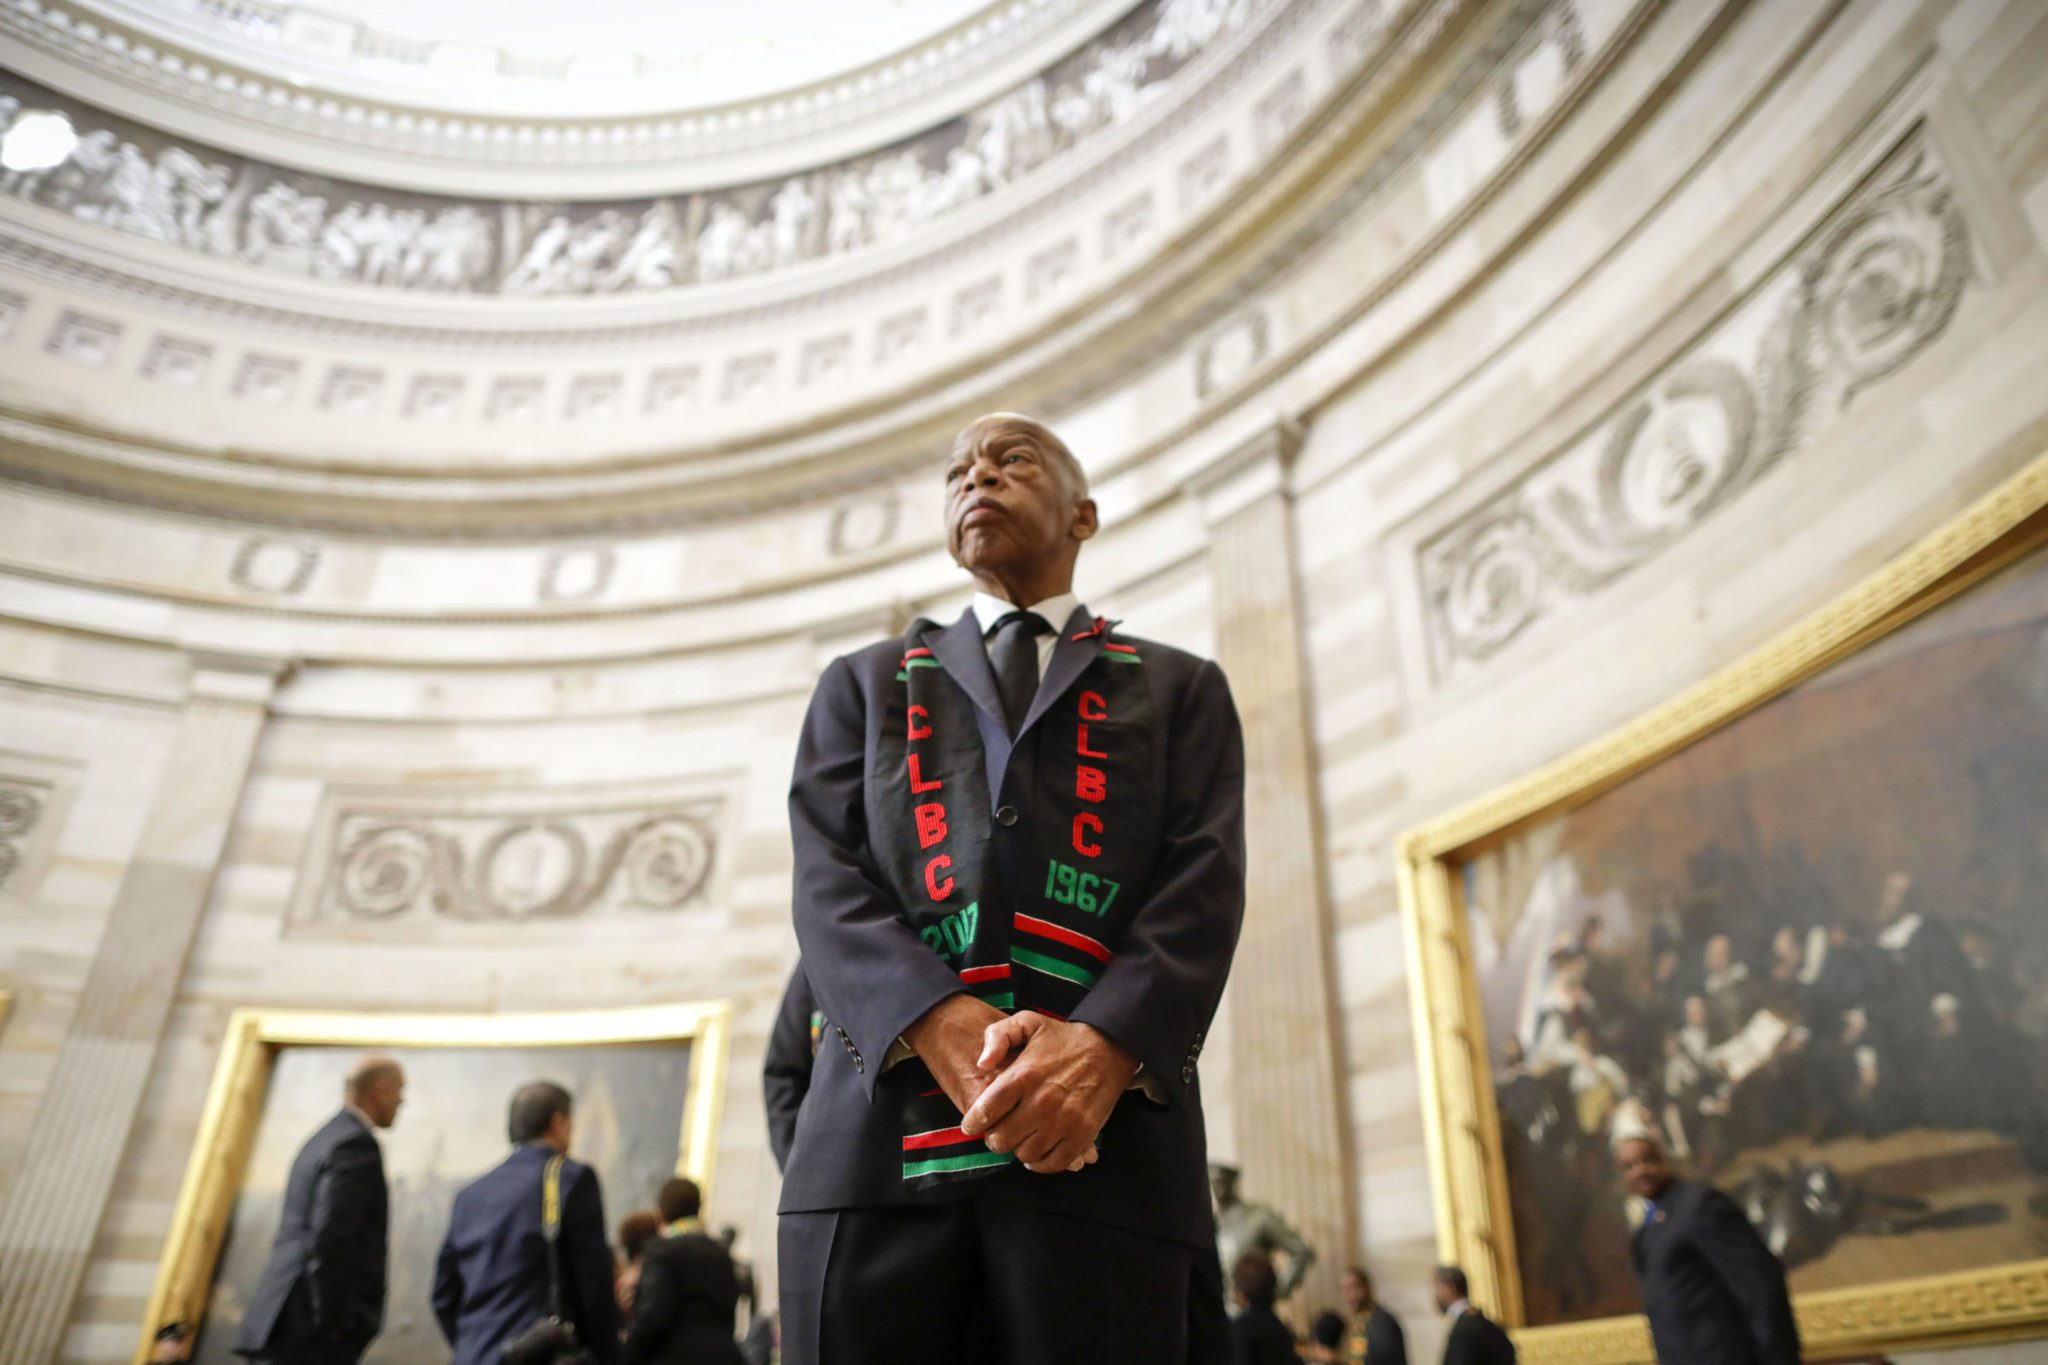 Photo of Congressman John Lewis standing tall at the U.S. Capitol in Washington, D.C. in 2019. Congressman John Lewis looks somber and thoughtful. Other elected officials are visible in the background, along with artwork in the U.S. Capitol building.